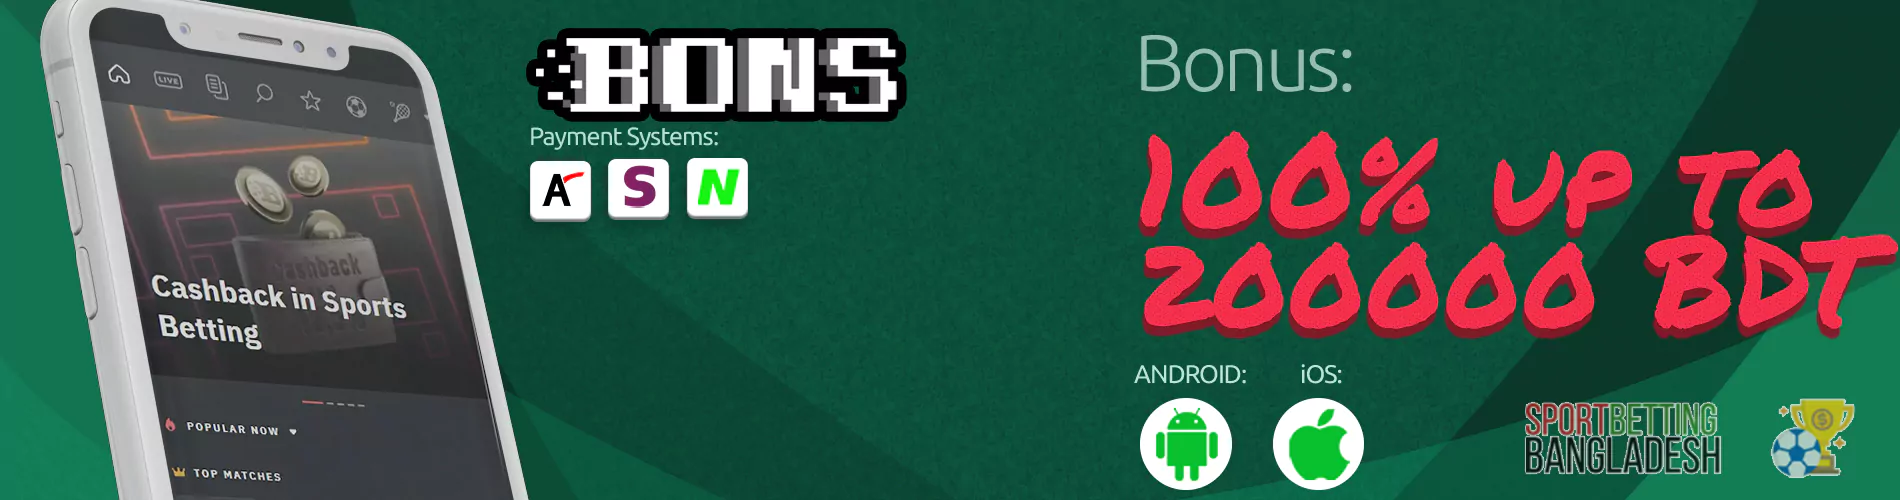 Bons Bangladesh app: payment systems, available platforms, welcome bonus.